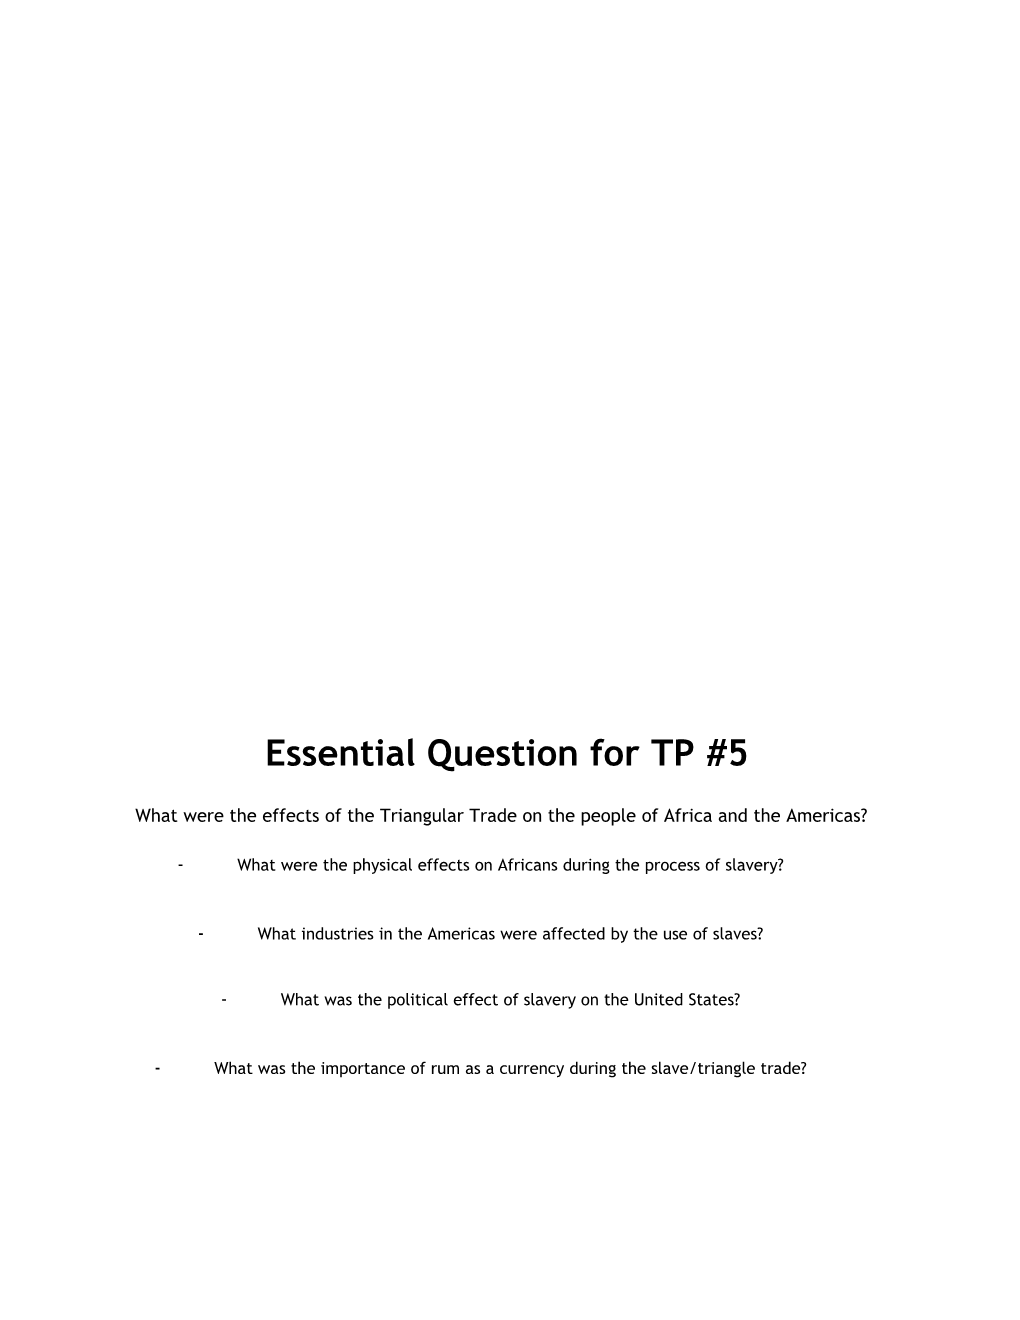 Essential Question for TP #5